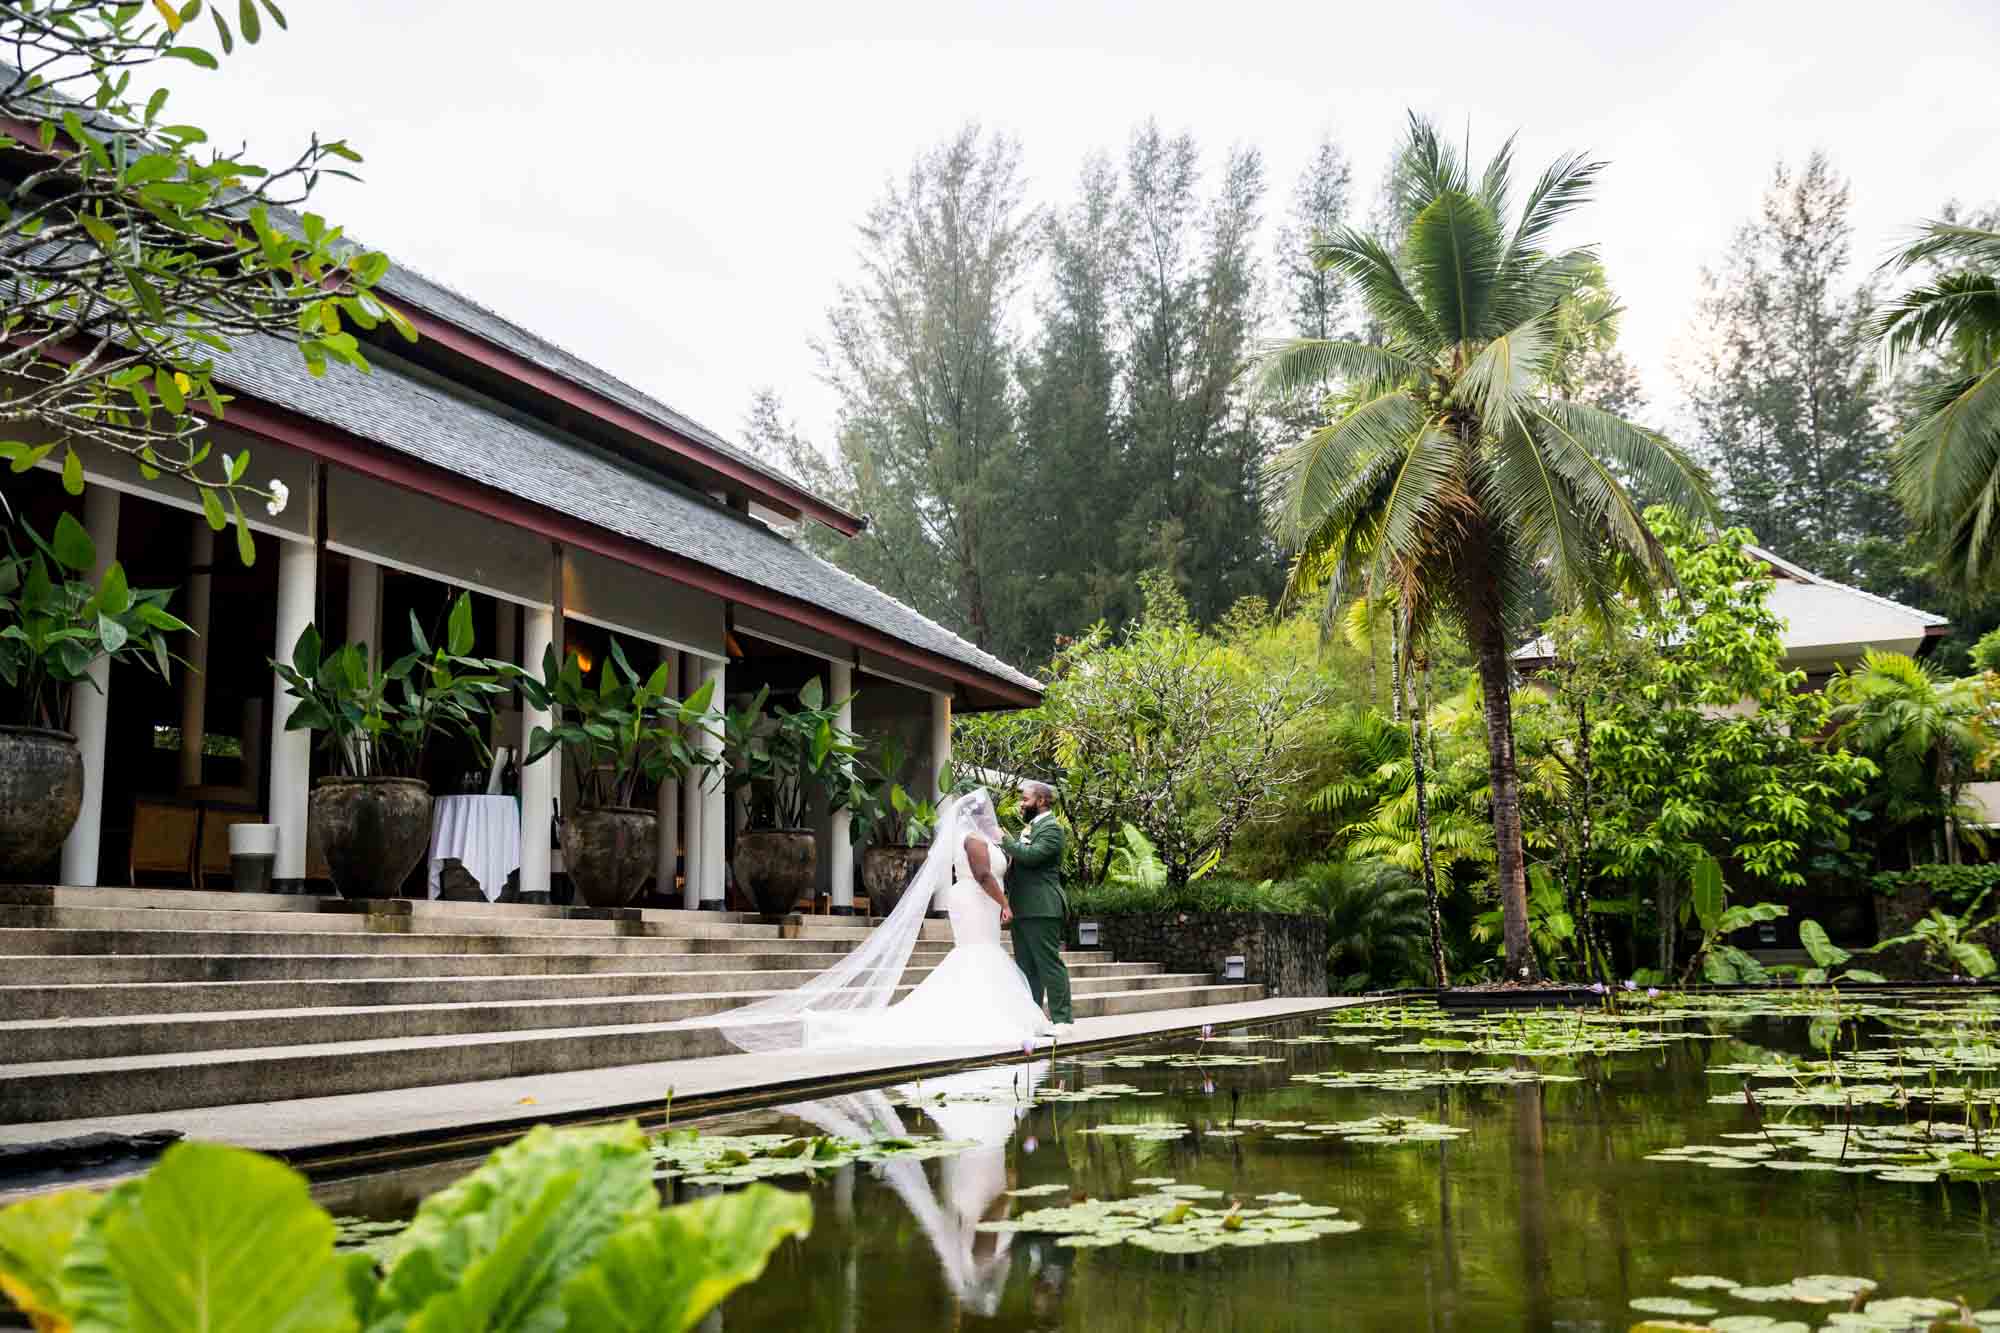 Bride and groom in front of pond for an article on destination wedding photography tips